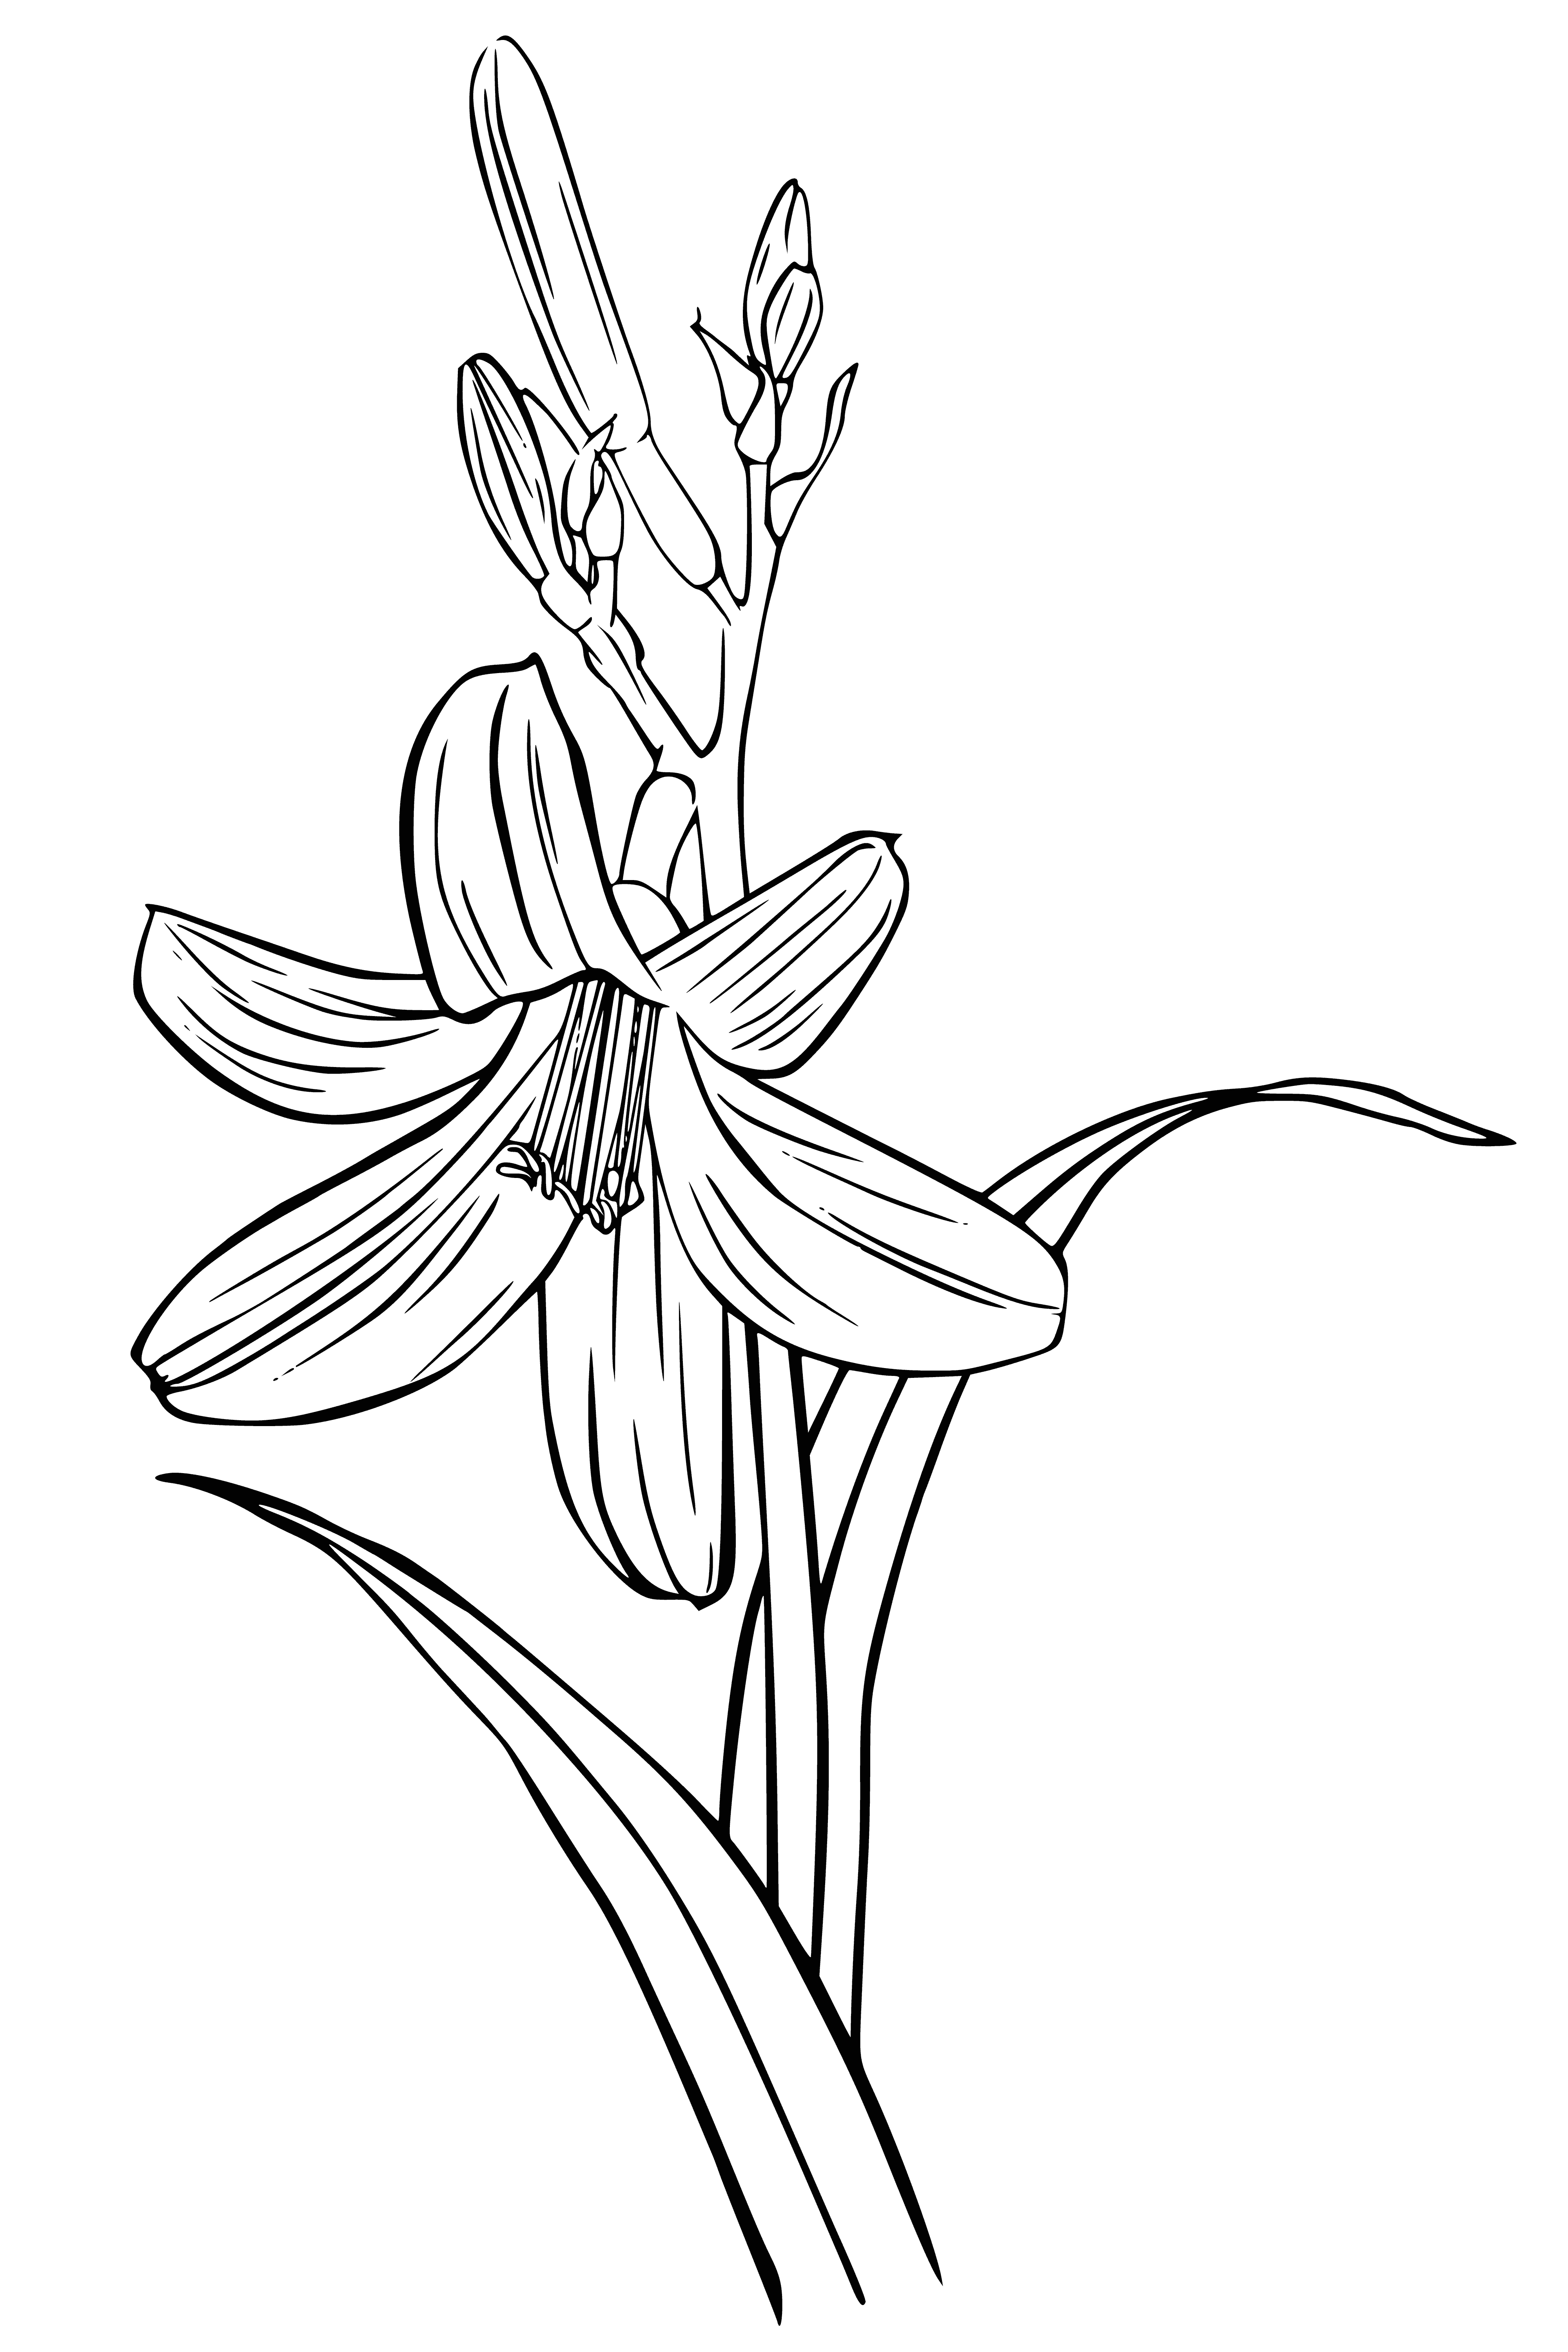 Lily coloring page